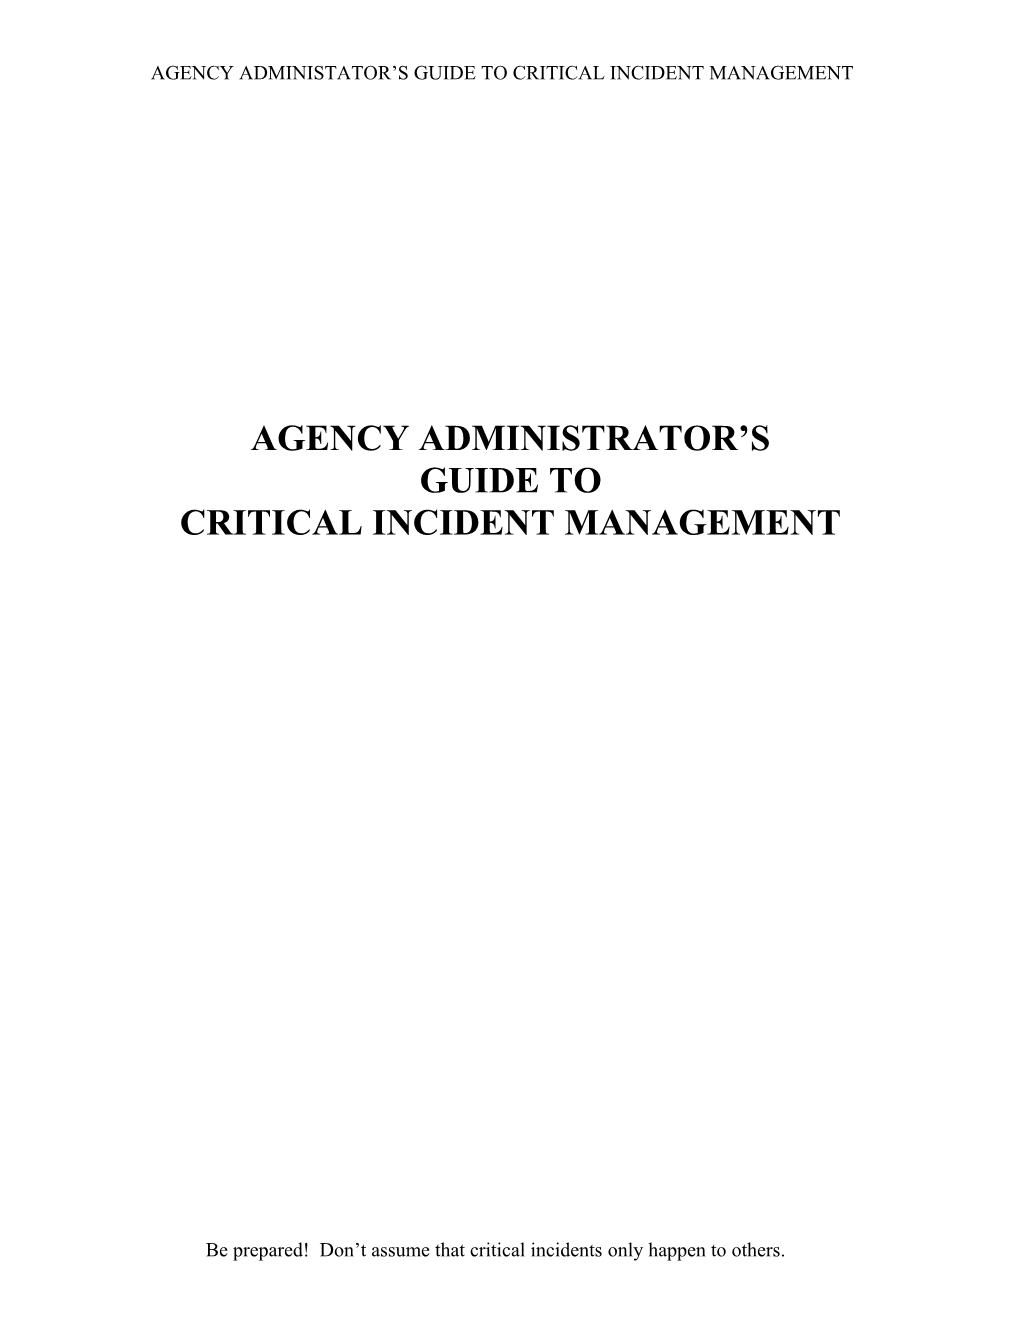 Agency Administator S Guide to Critical Incident Management